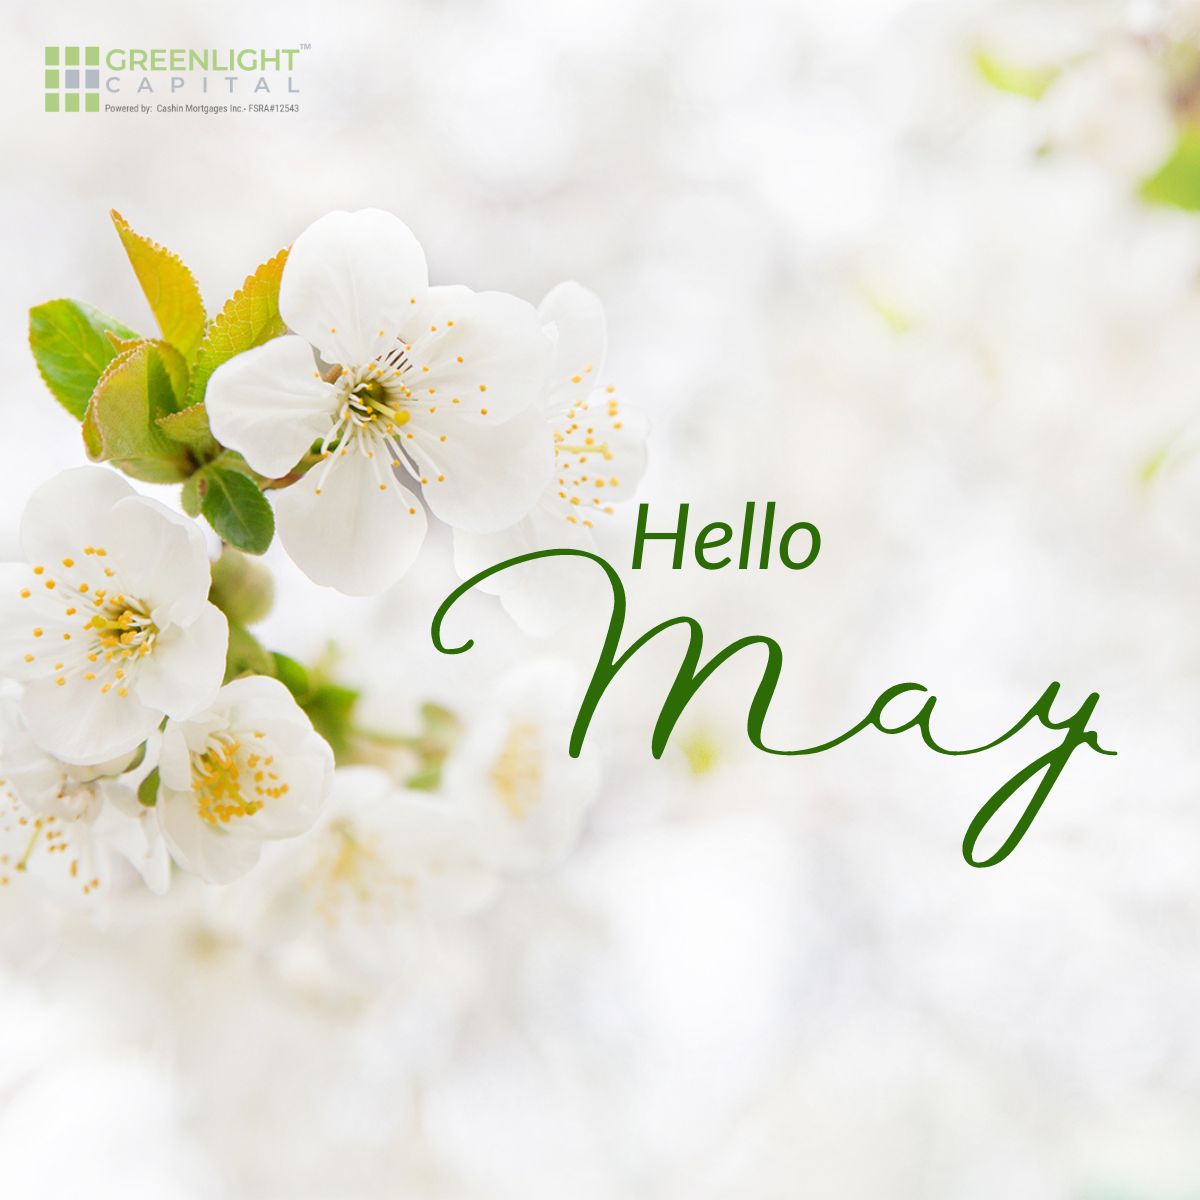 Hello May! 🌸 Let's make this month blooming with financial possibilities. From our private lending team to you, may your goals flourish and dreams come true. 💼✨ 

#MayGoals #PrivateLending #PrivateLending #TorontoMortgages #GreenlightCapital #Gogreenlightloans